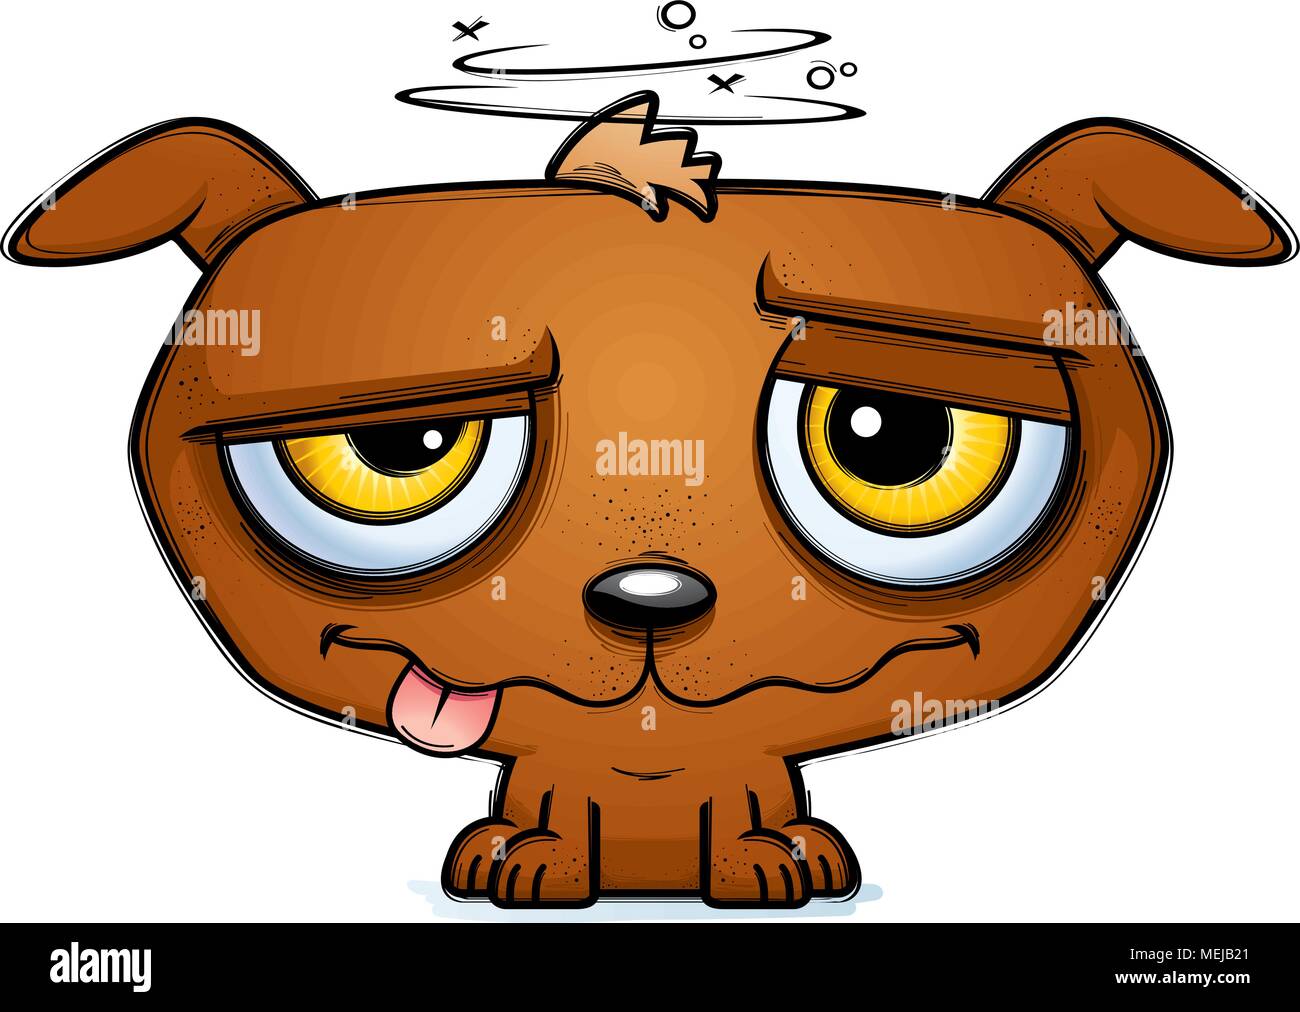 A cartoon illustration of a dog looking intoxicated. Stock Vector